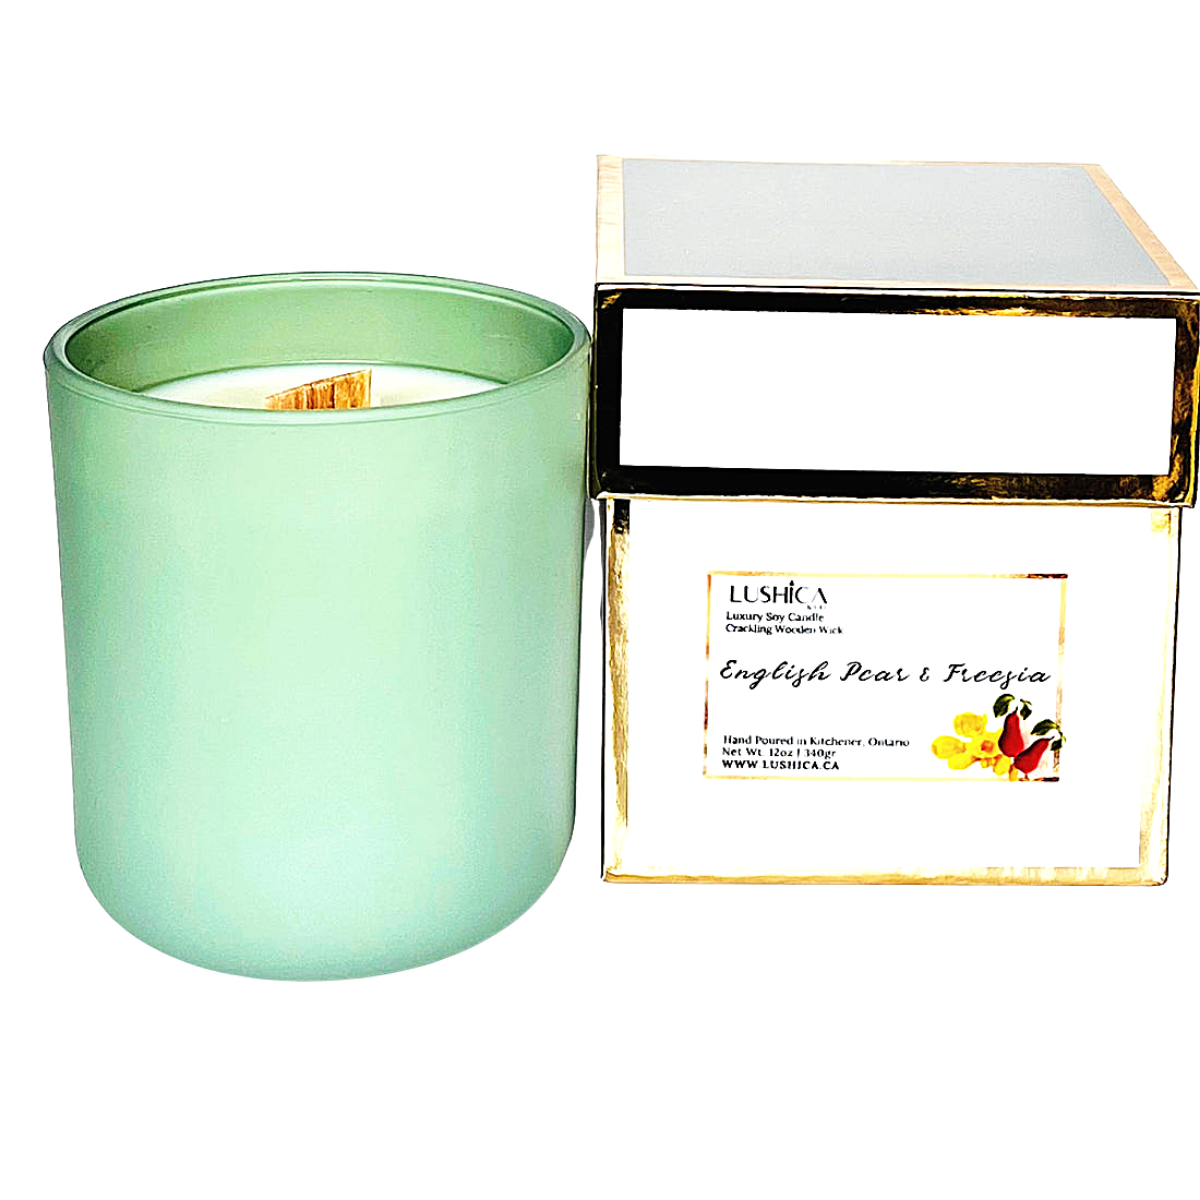 English Pear and Freesia Luxury Wooden Wick Candle